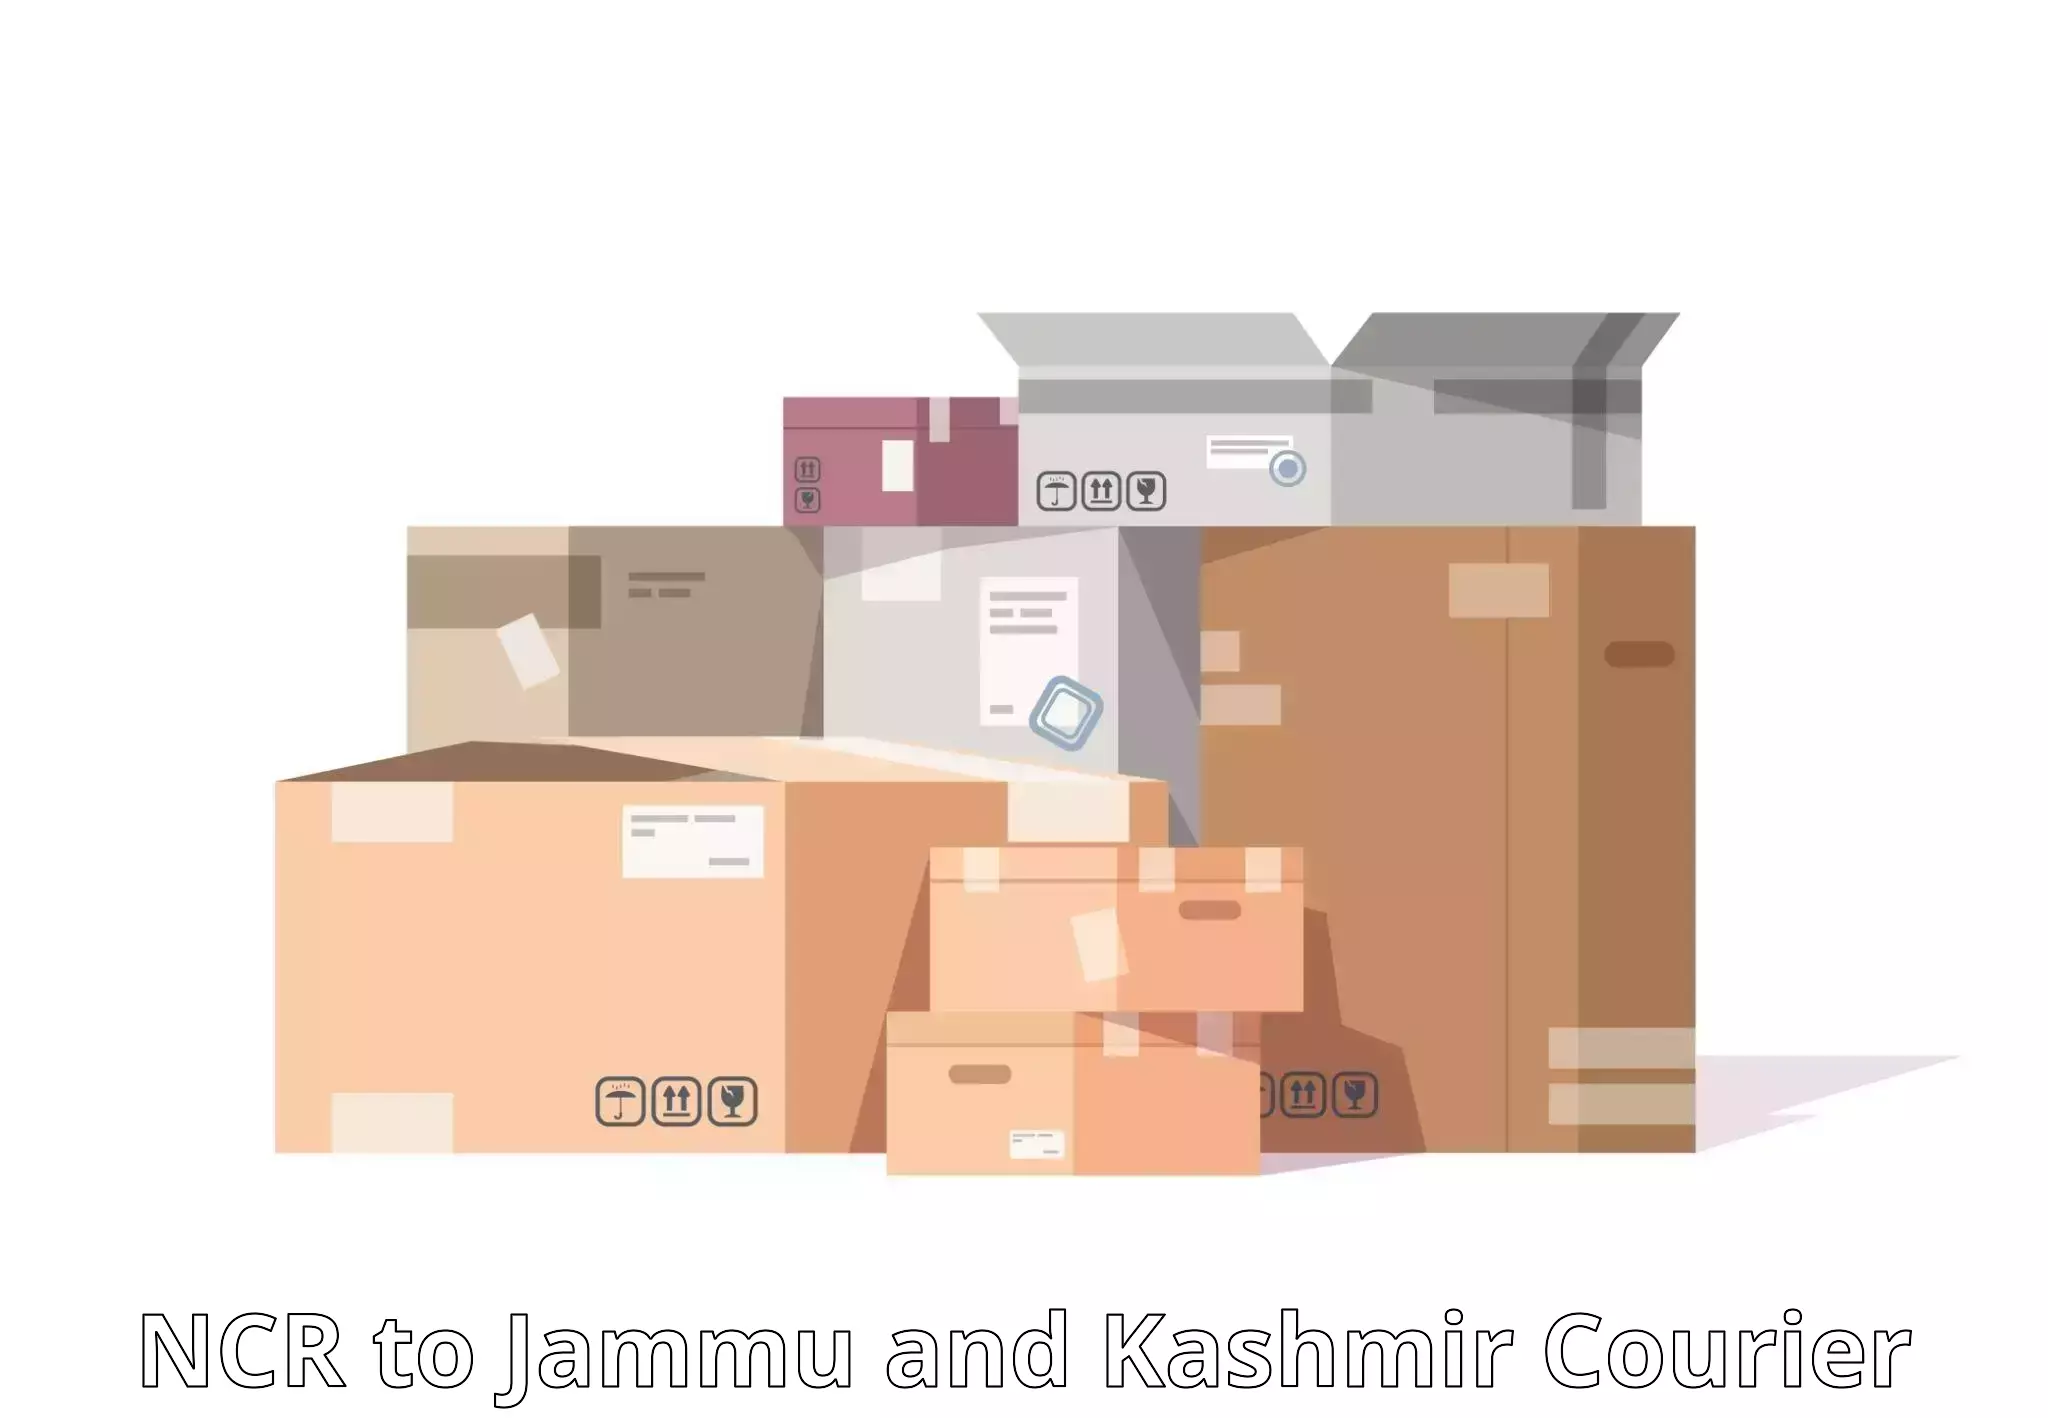 Local courier options NCR to University of Jammu